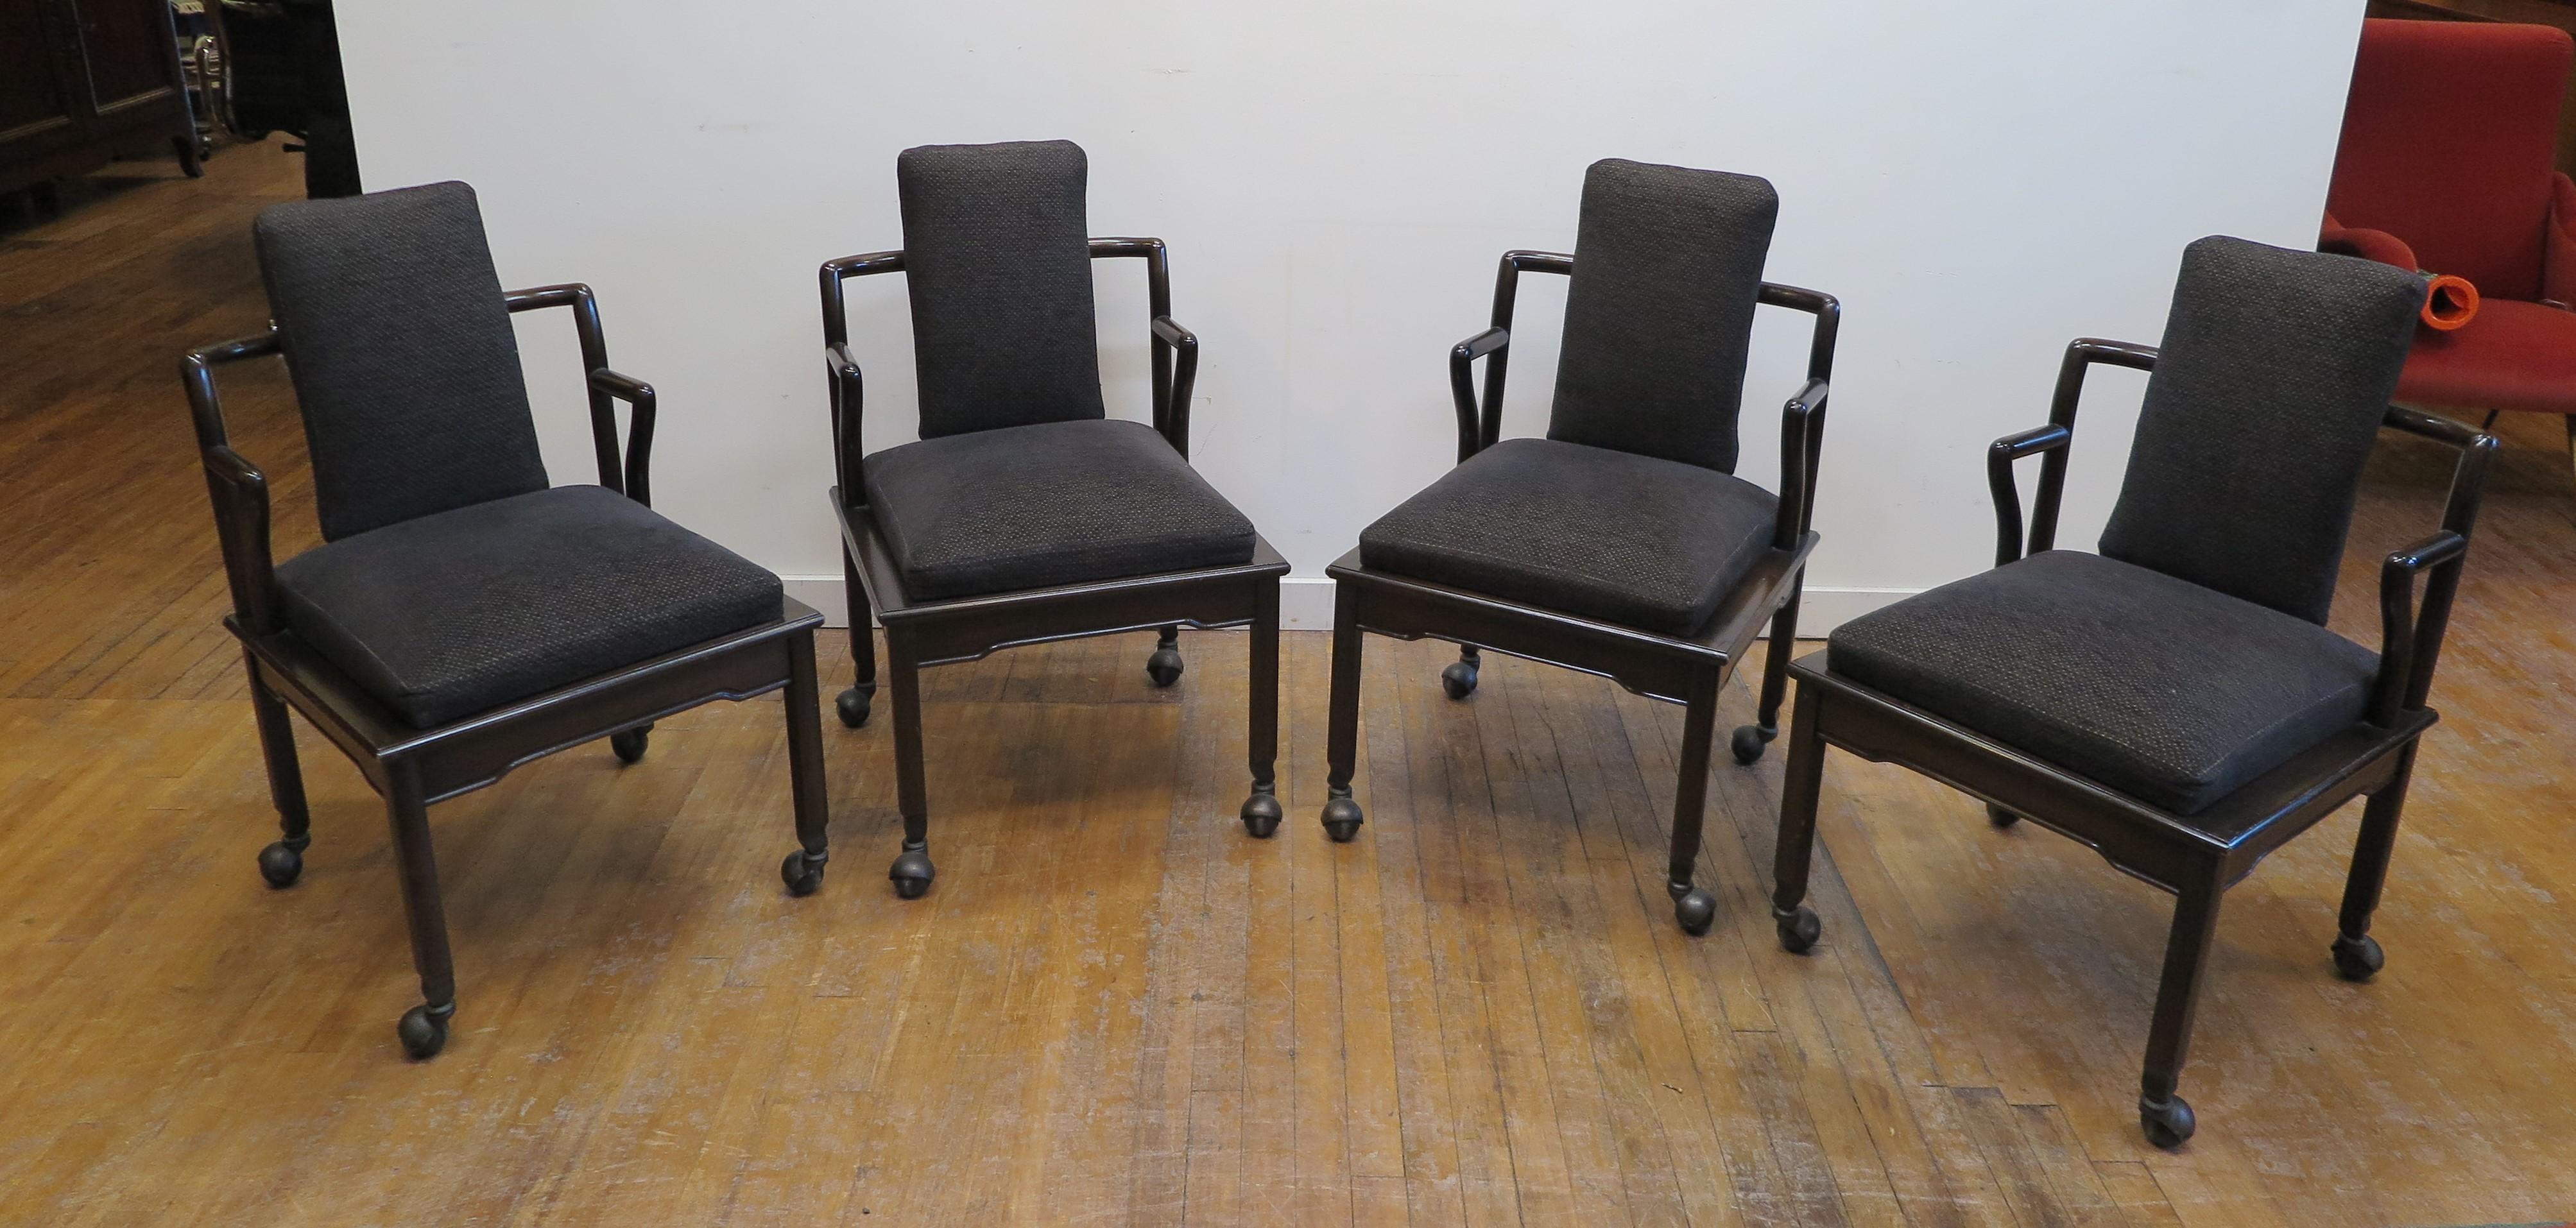 John Widdicomb Asian Inspired Chairs For Sale 4